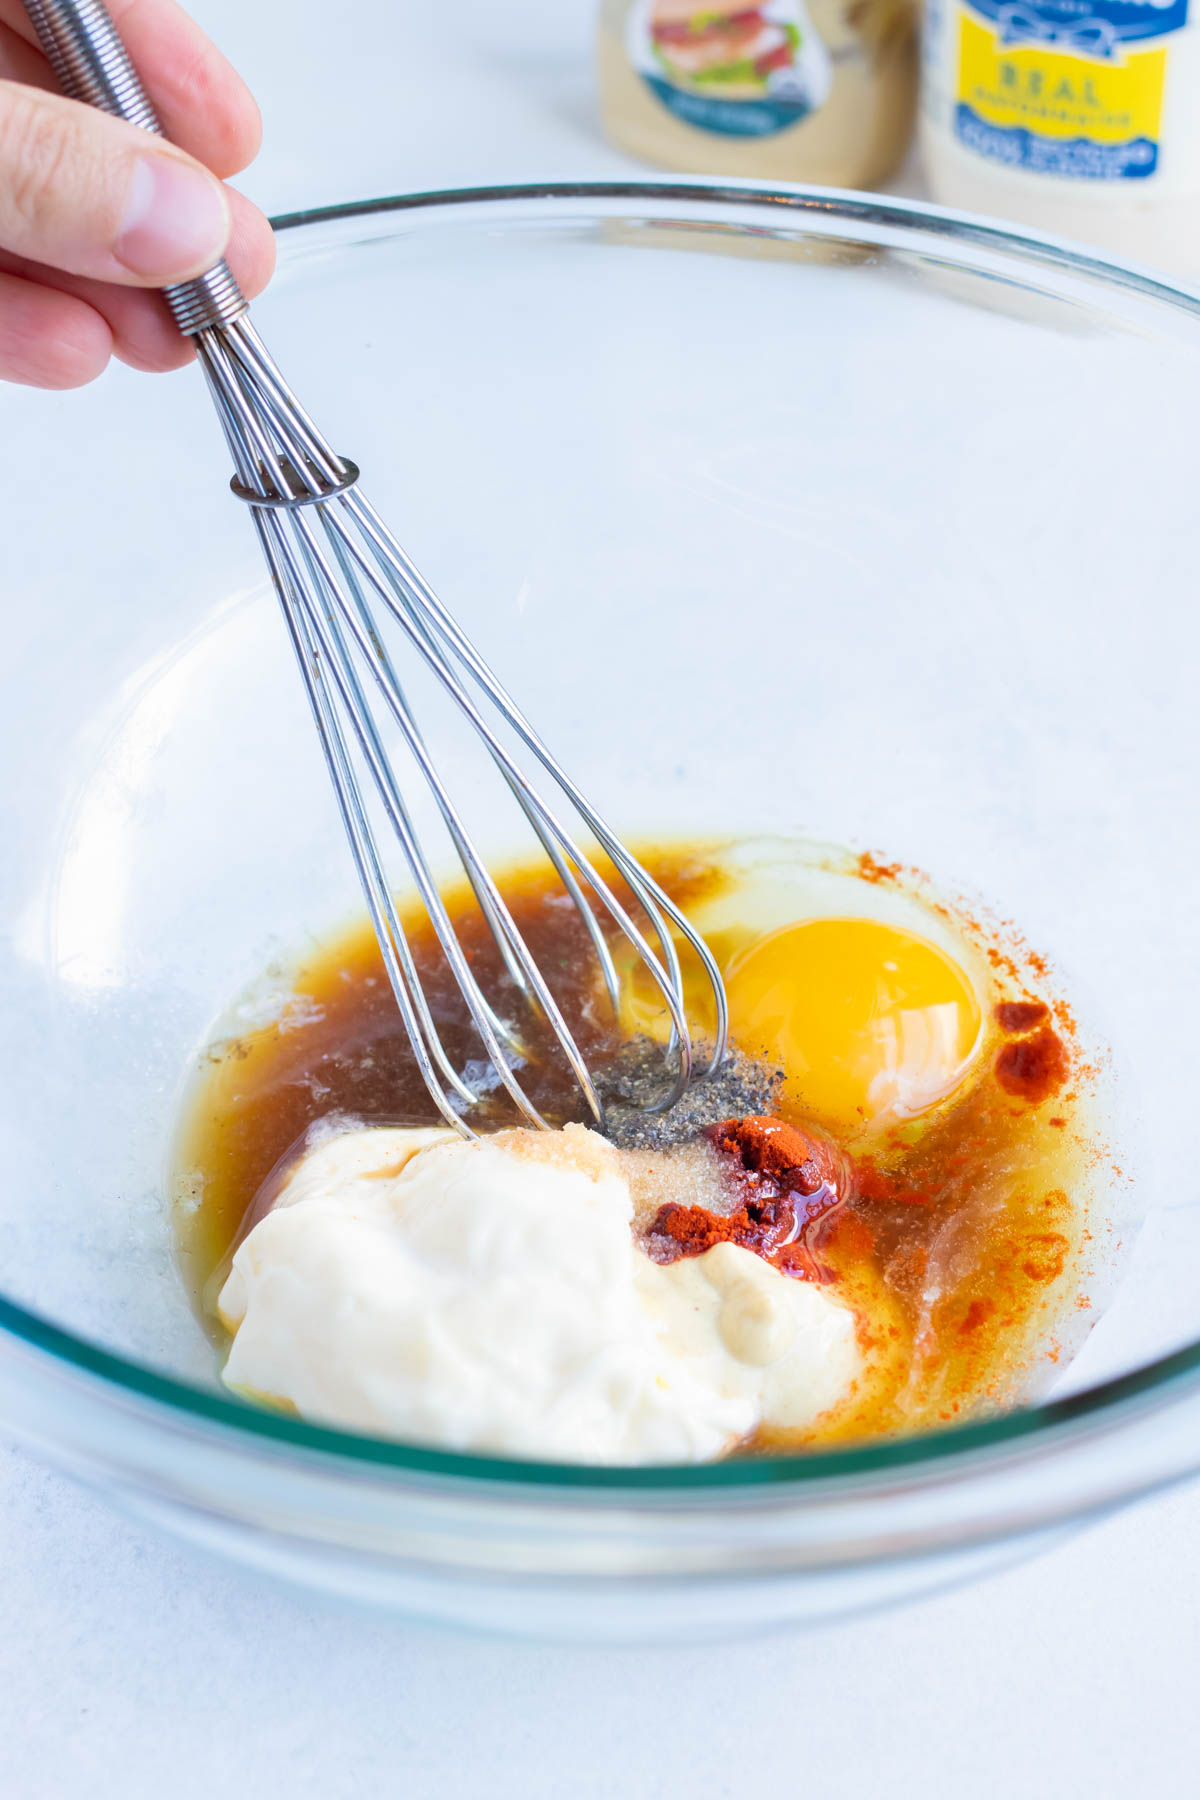 Egg, mayonnaise, worcestershire sauce and other wet ingredients are whisked together in a bowl.